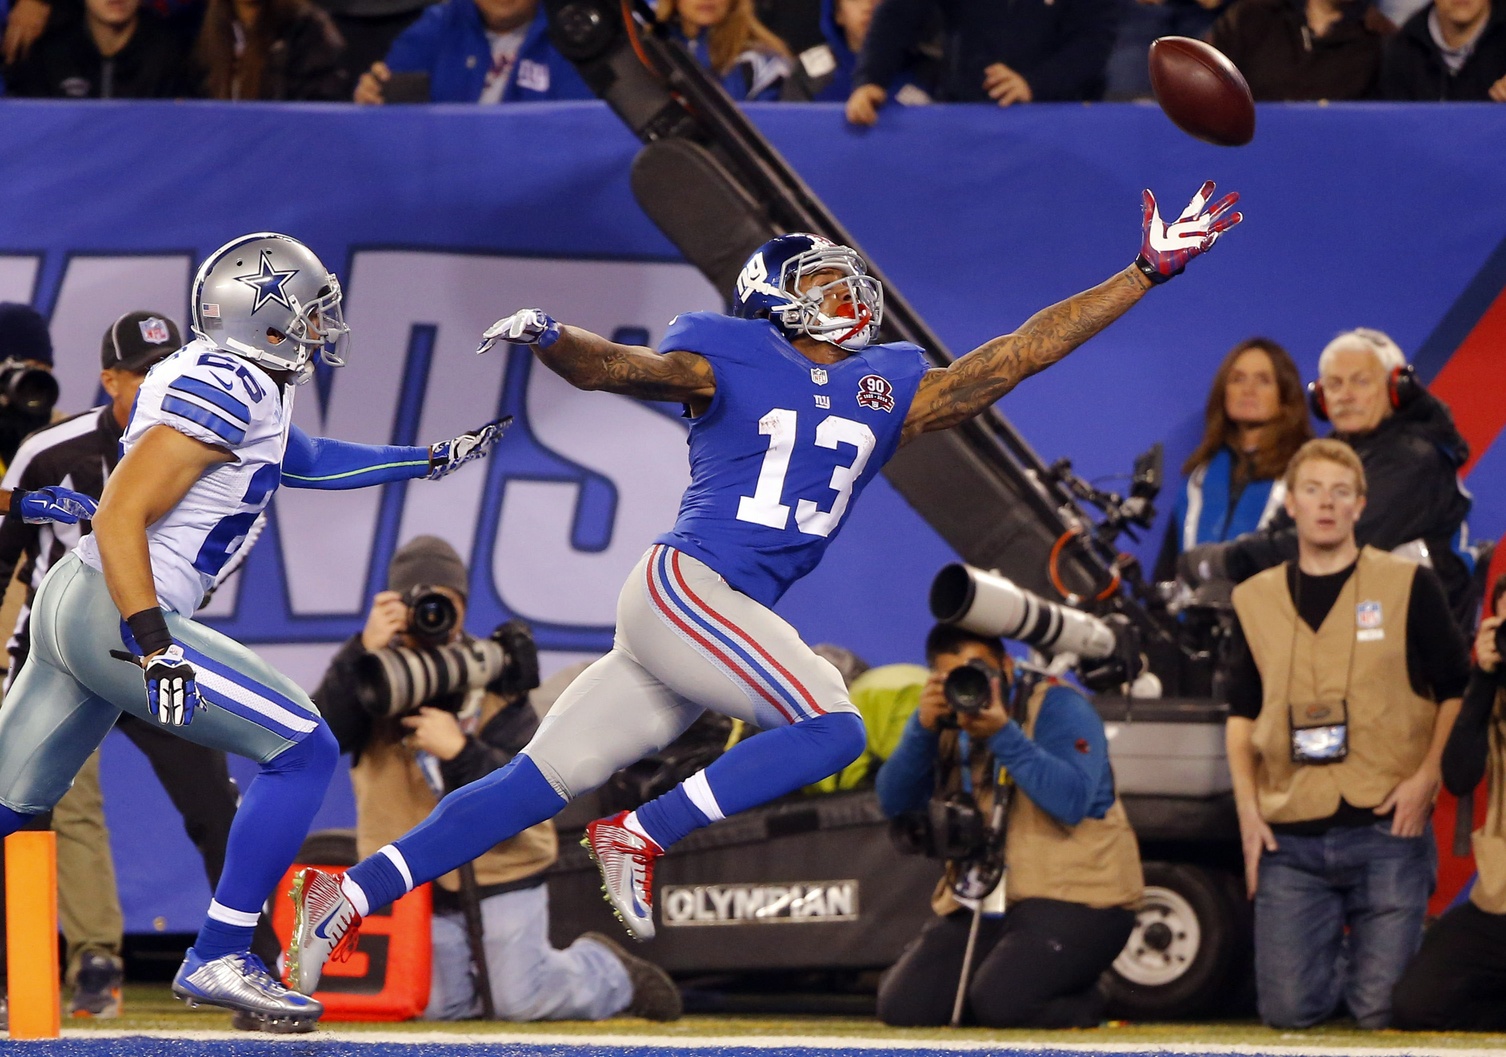 New York Giants rookie wideout Odell Beckham Jr. was worth the